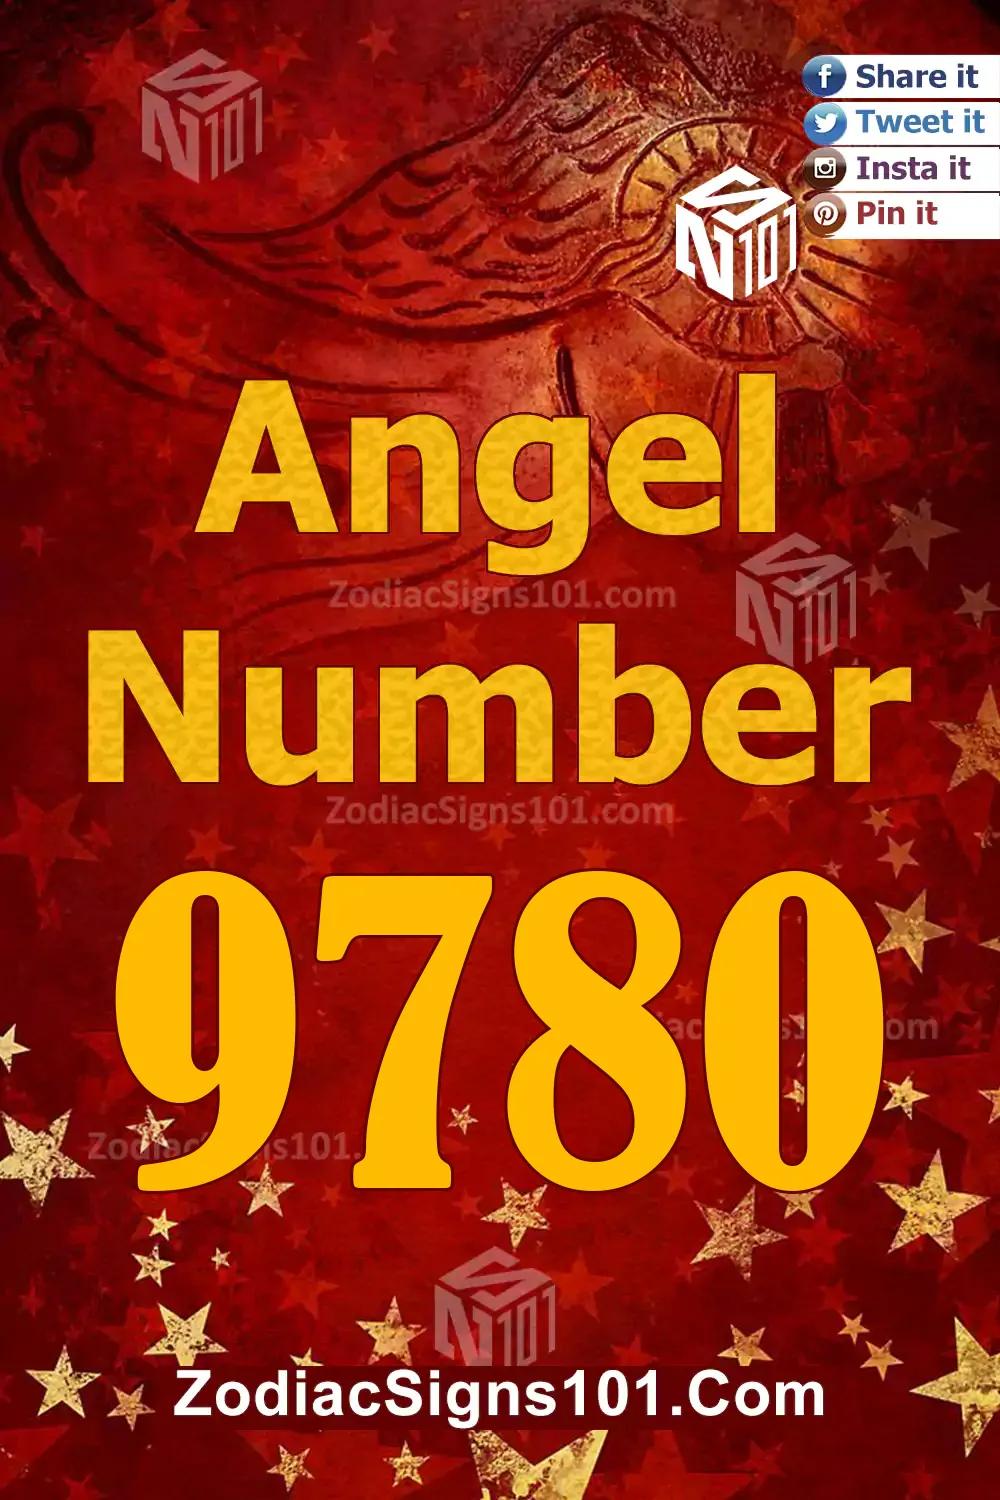 9780 Angel Number Meaning